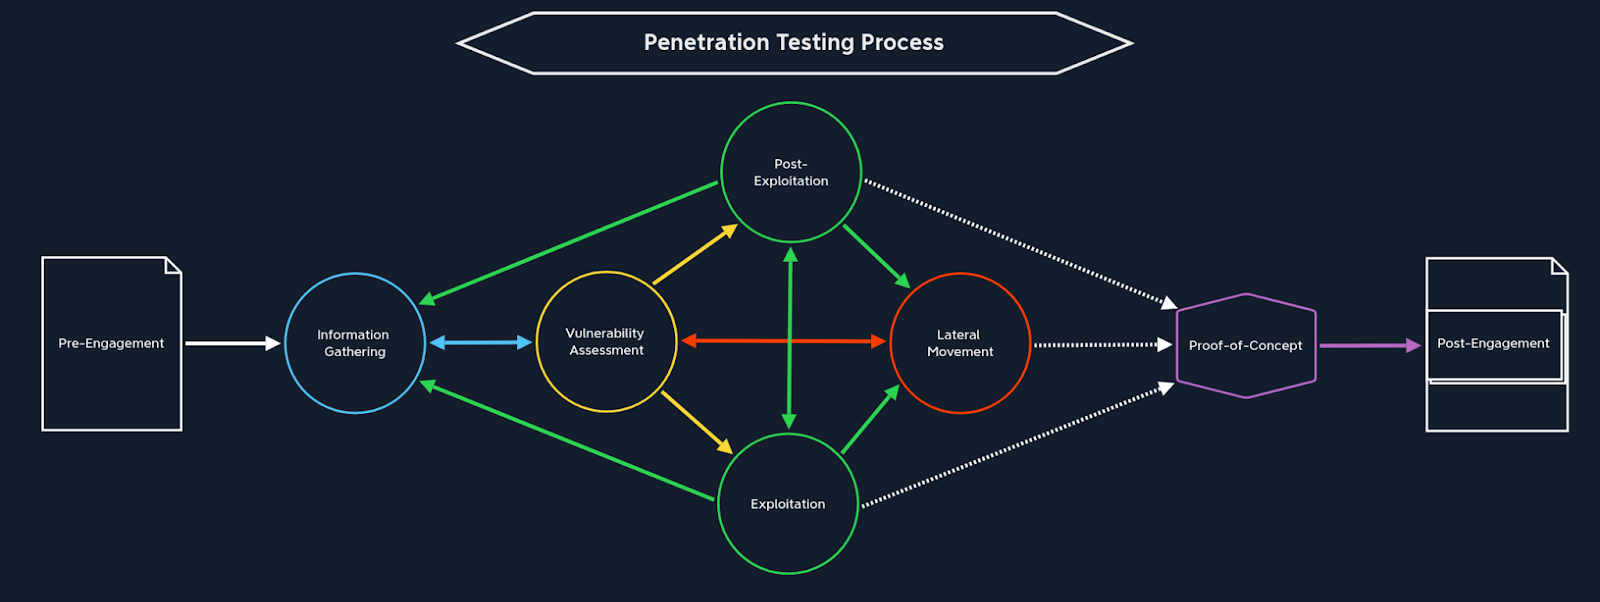 Penetration Testing Illustration from Hack The Box